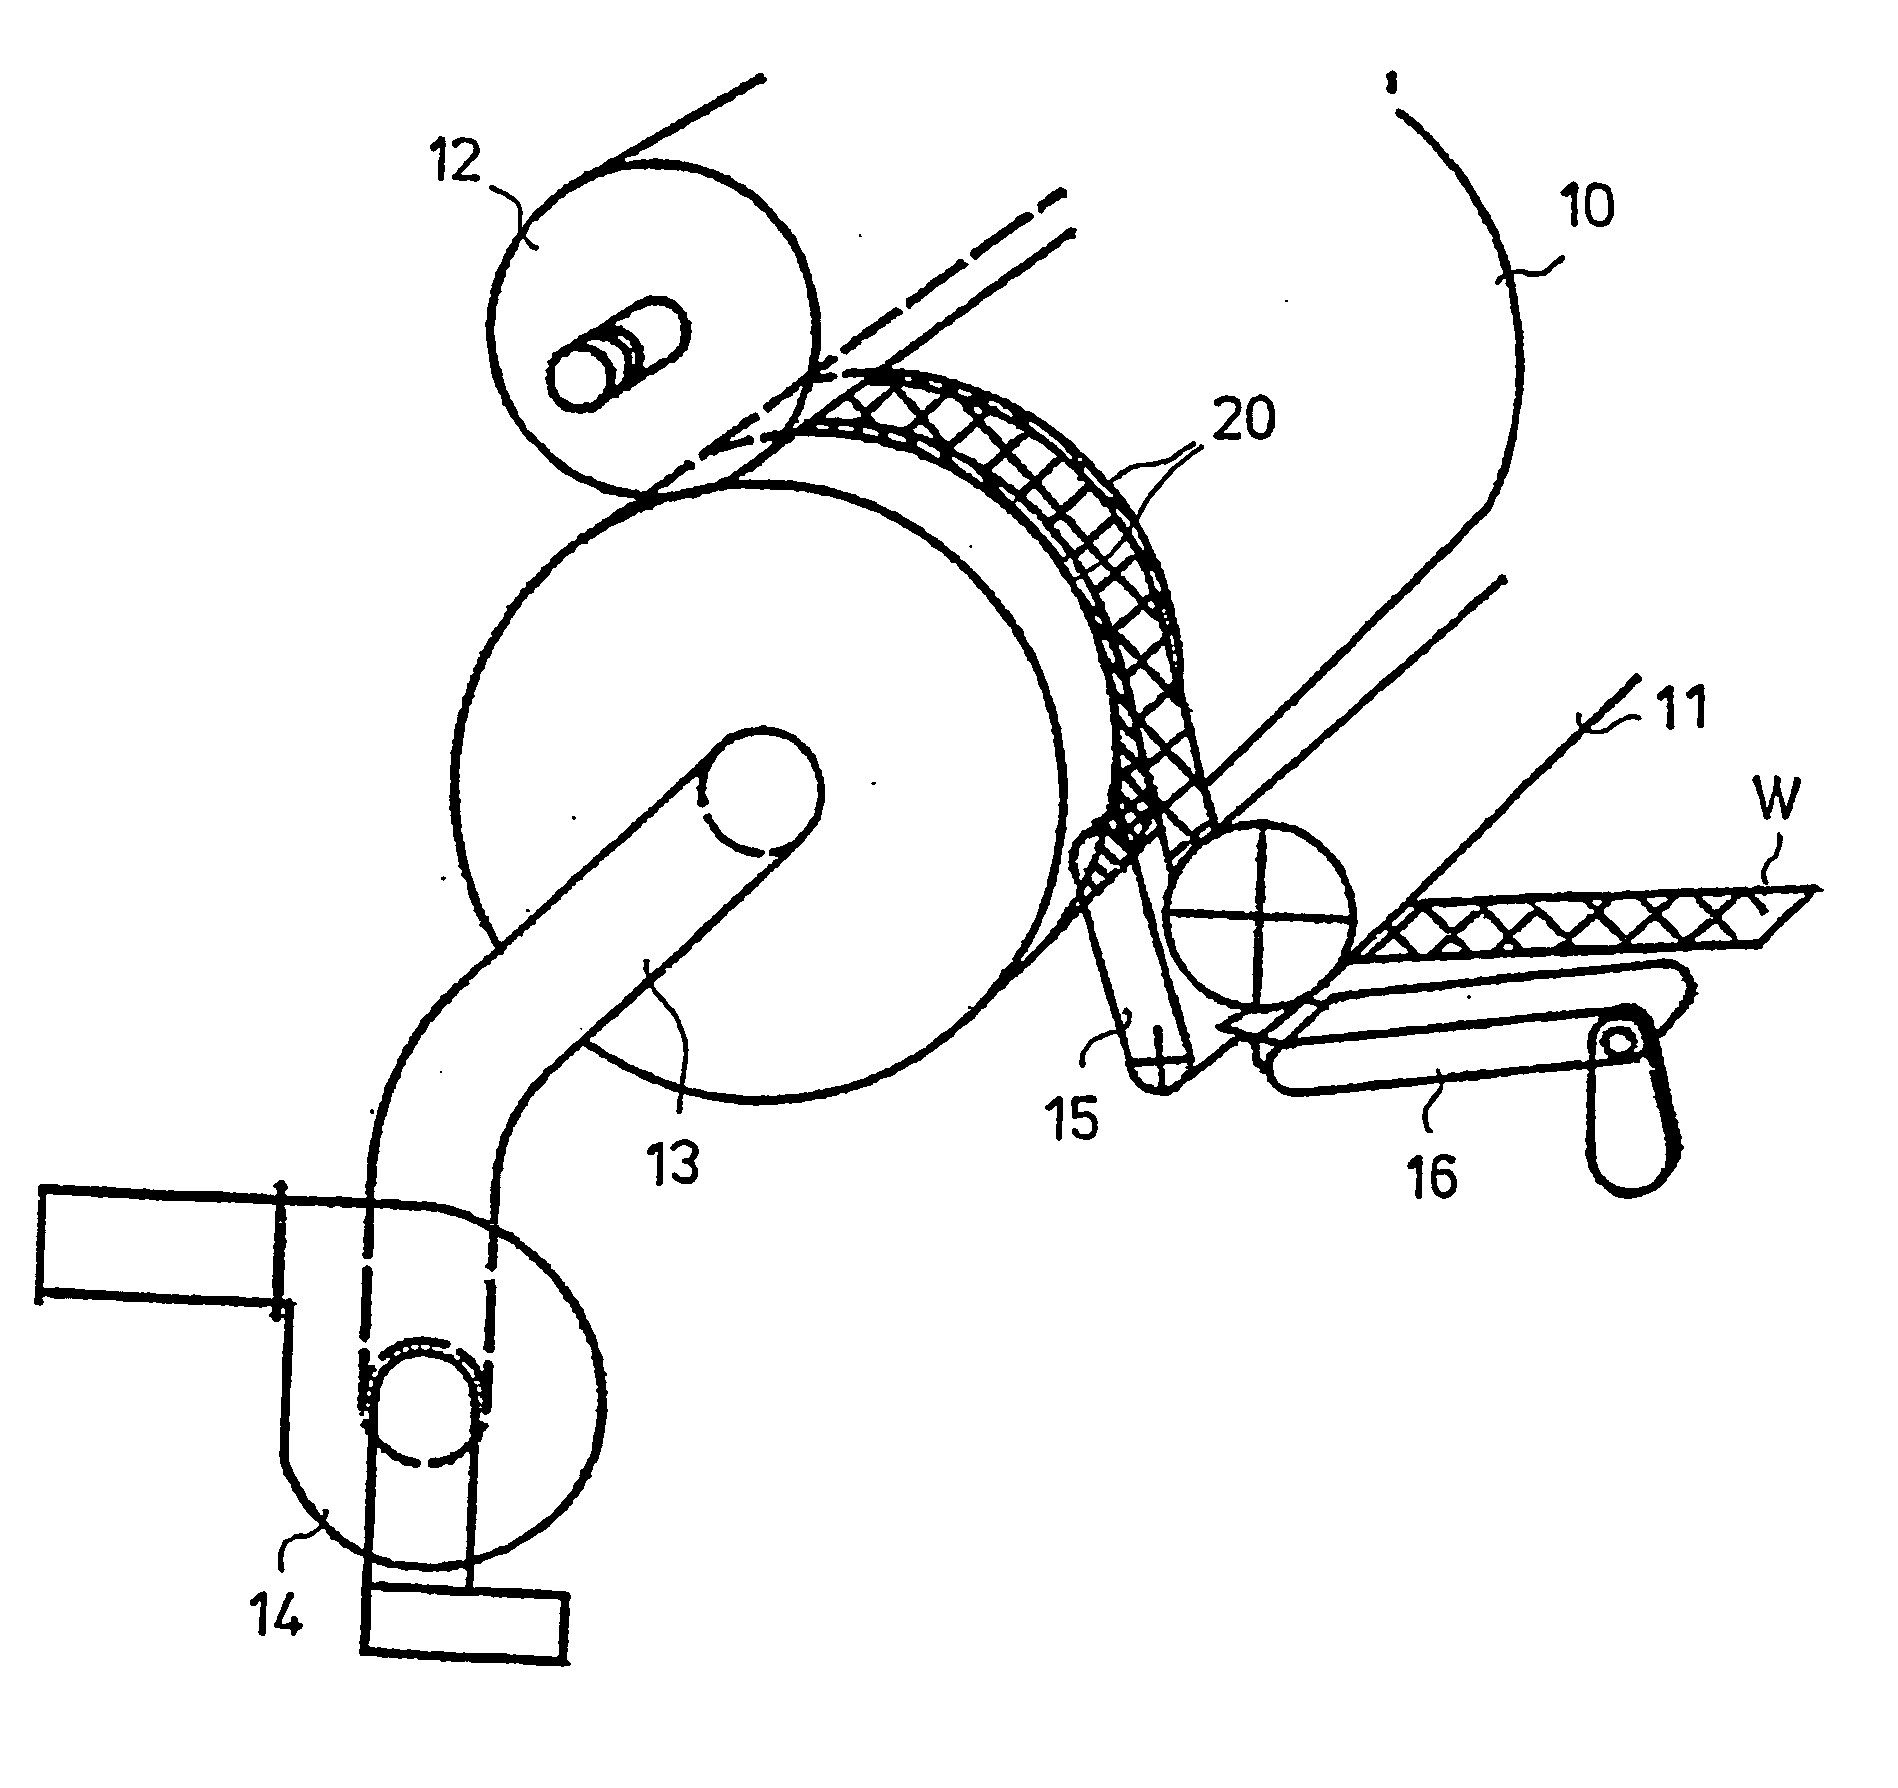 Method and device for threading a web in the reeling of a paper or board web